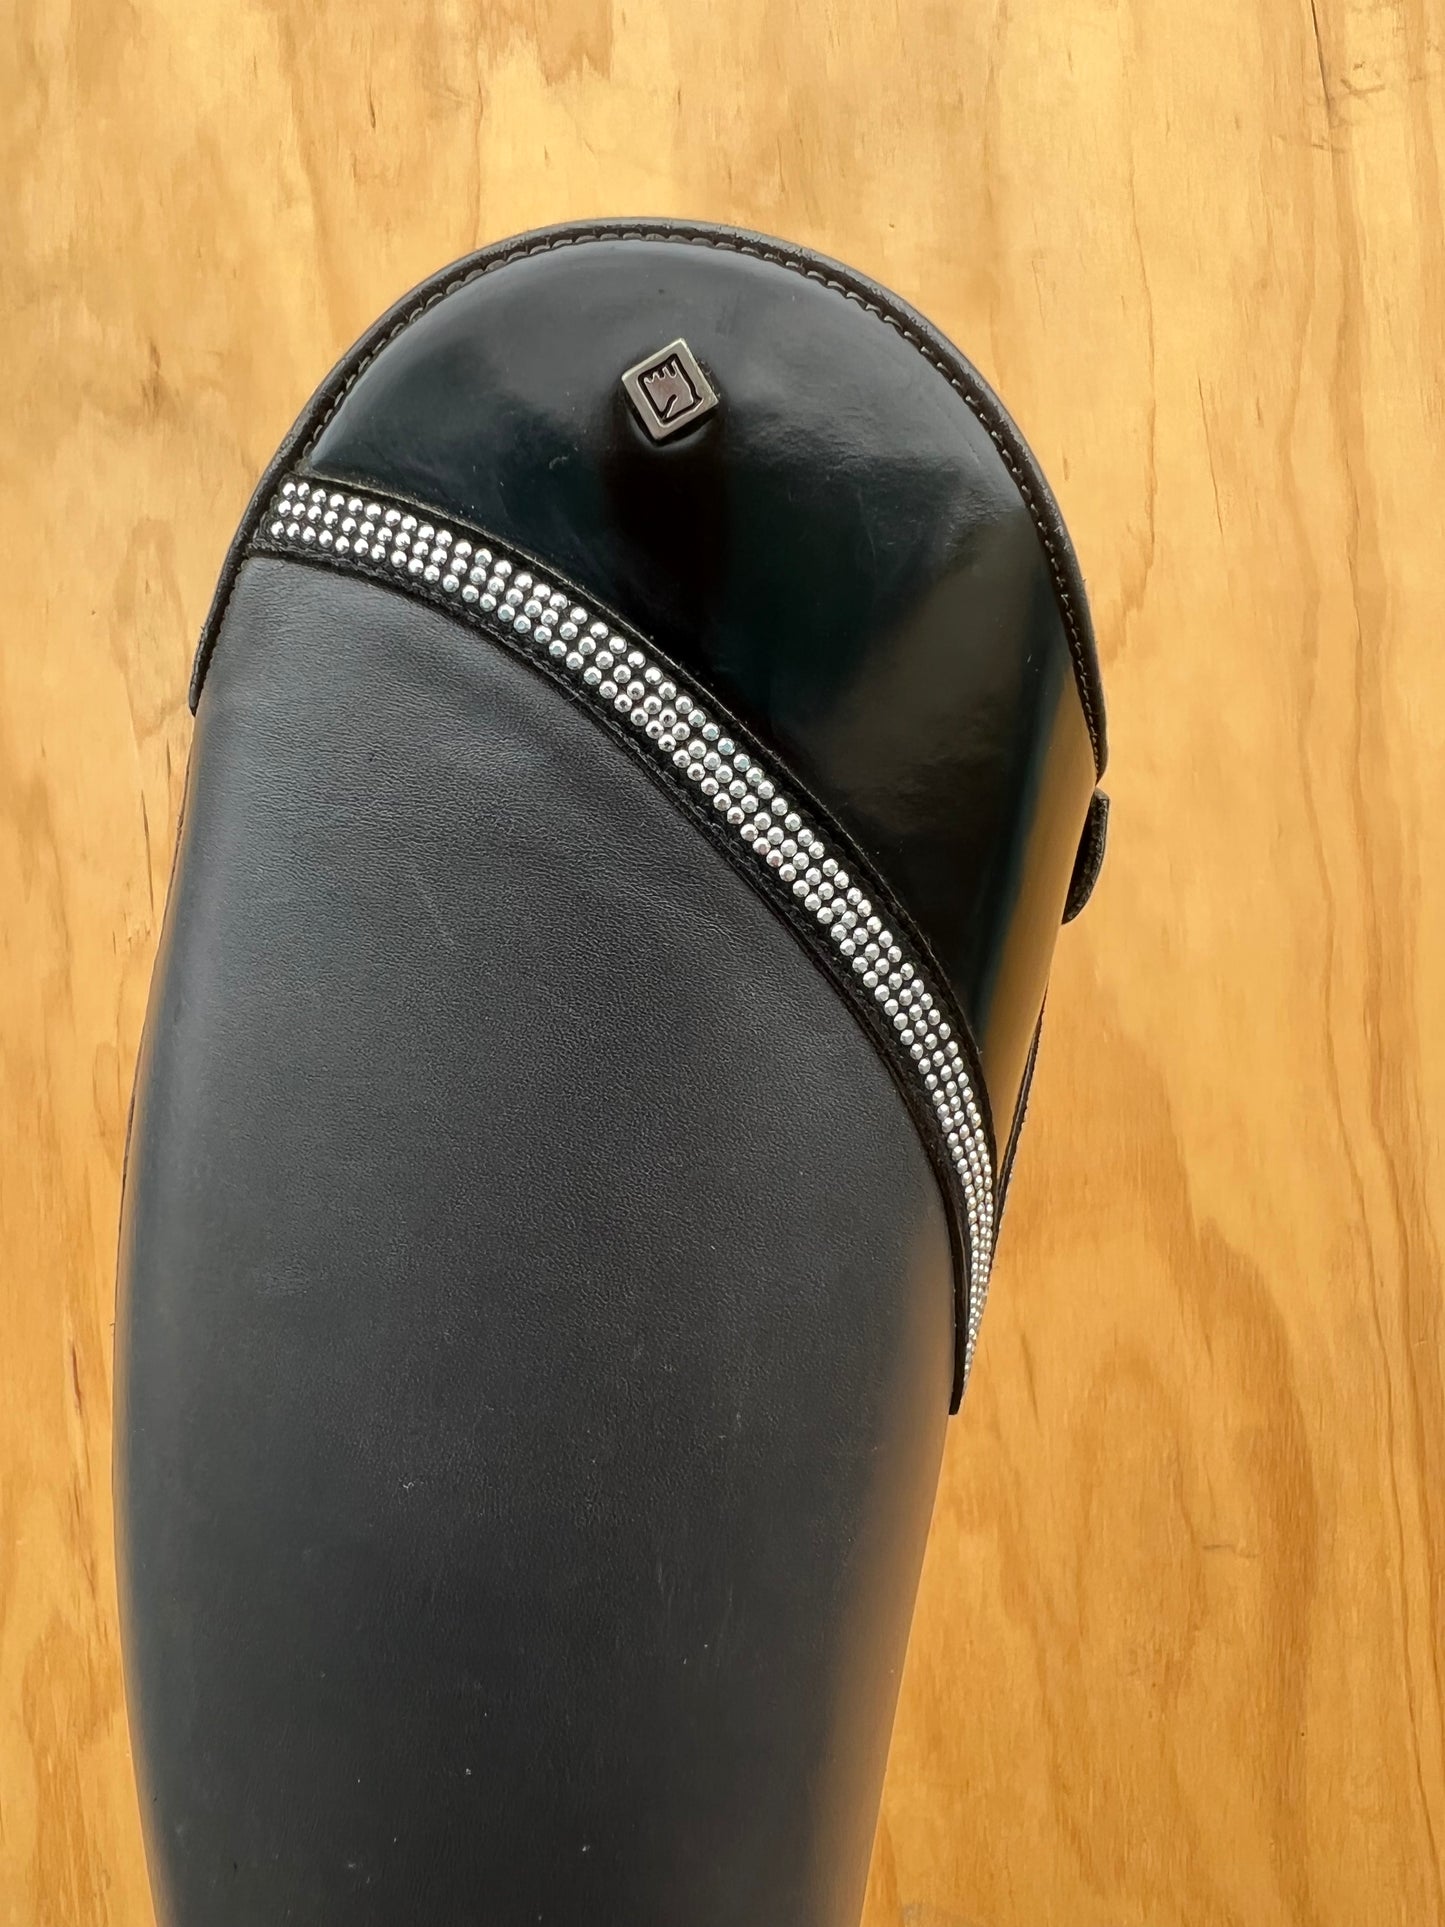 DENIRO ELEGANTE ANTHRACITE WITH BLACK PATENT AND STUD DETAIL SIZE 39 MA S